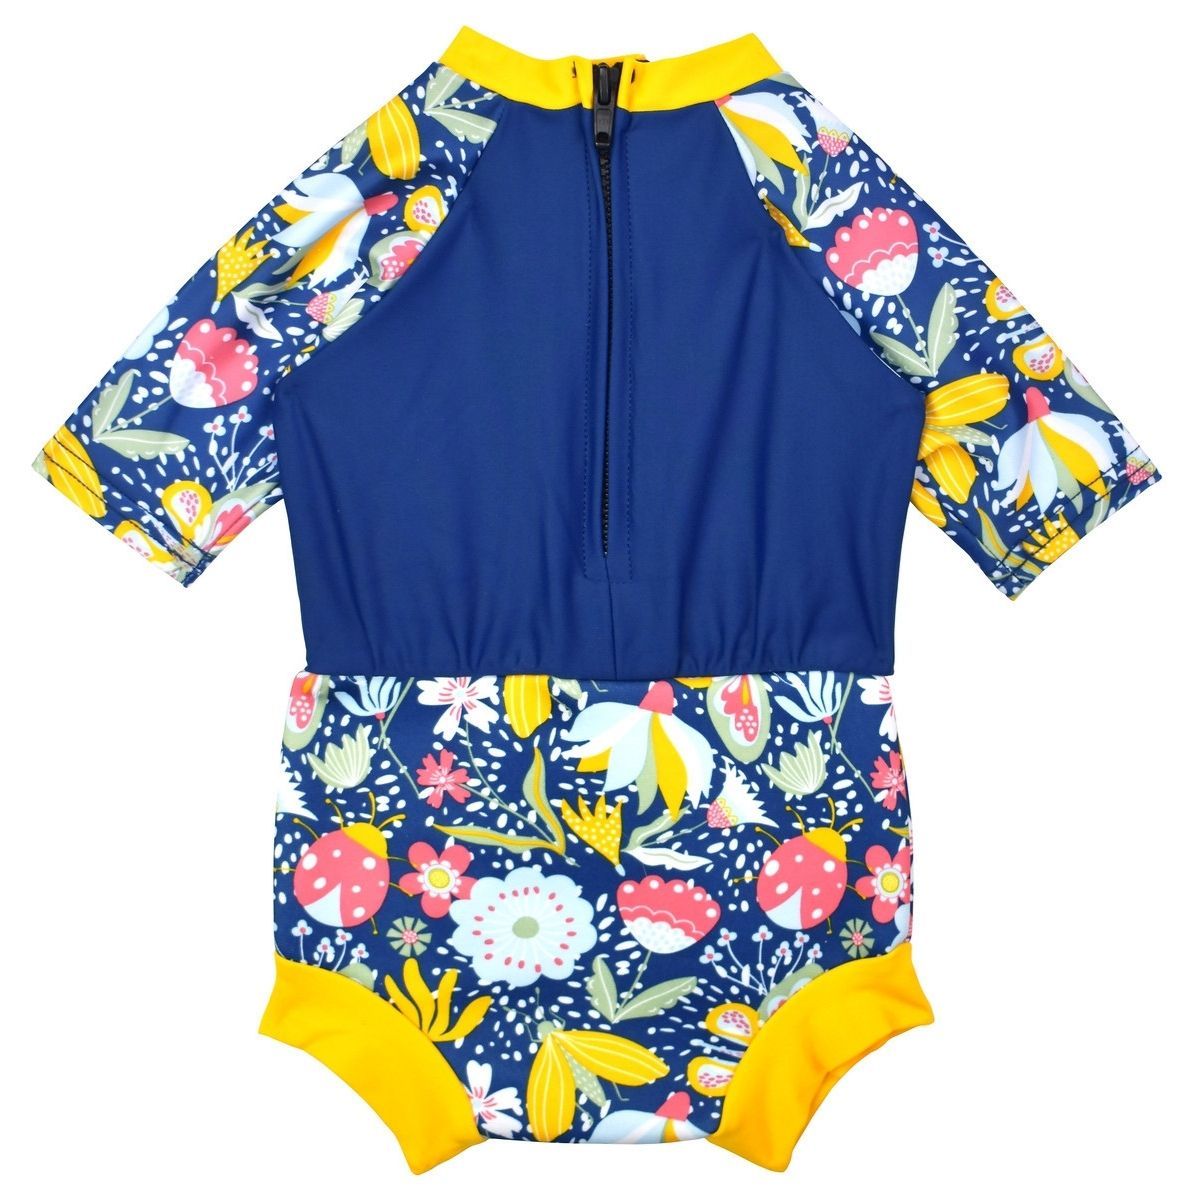 Happy Nappy Sunsuit in navy blue with yellow trims and floral print. Back.